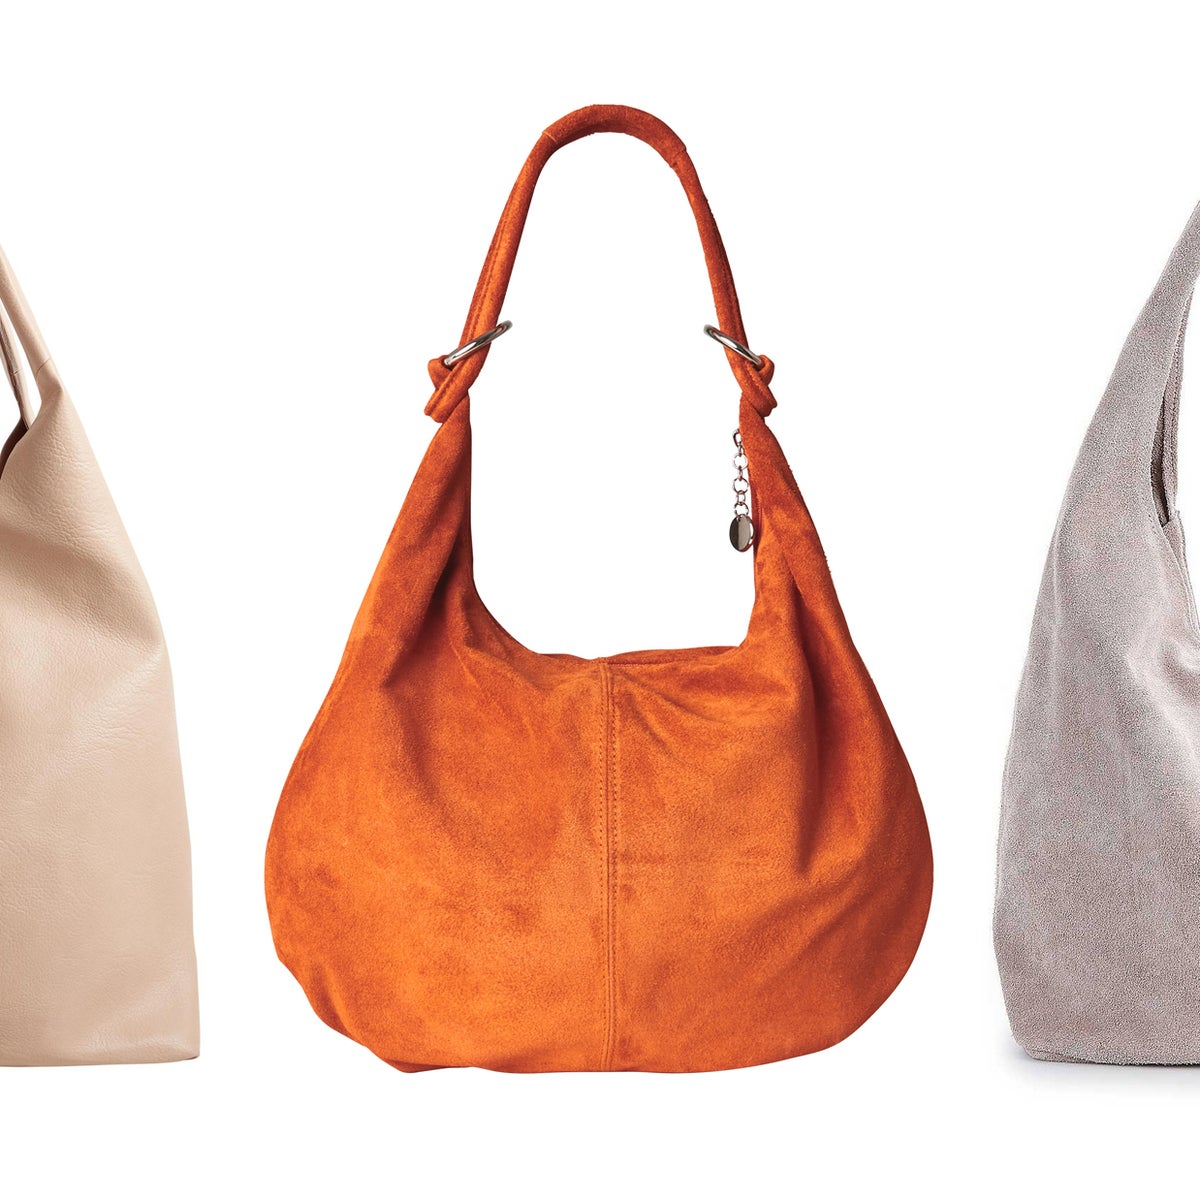 Hobo bags are back: 5 of the season's most stylish totes